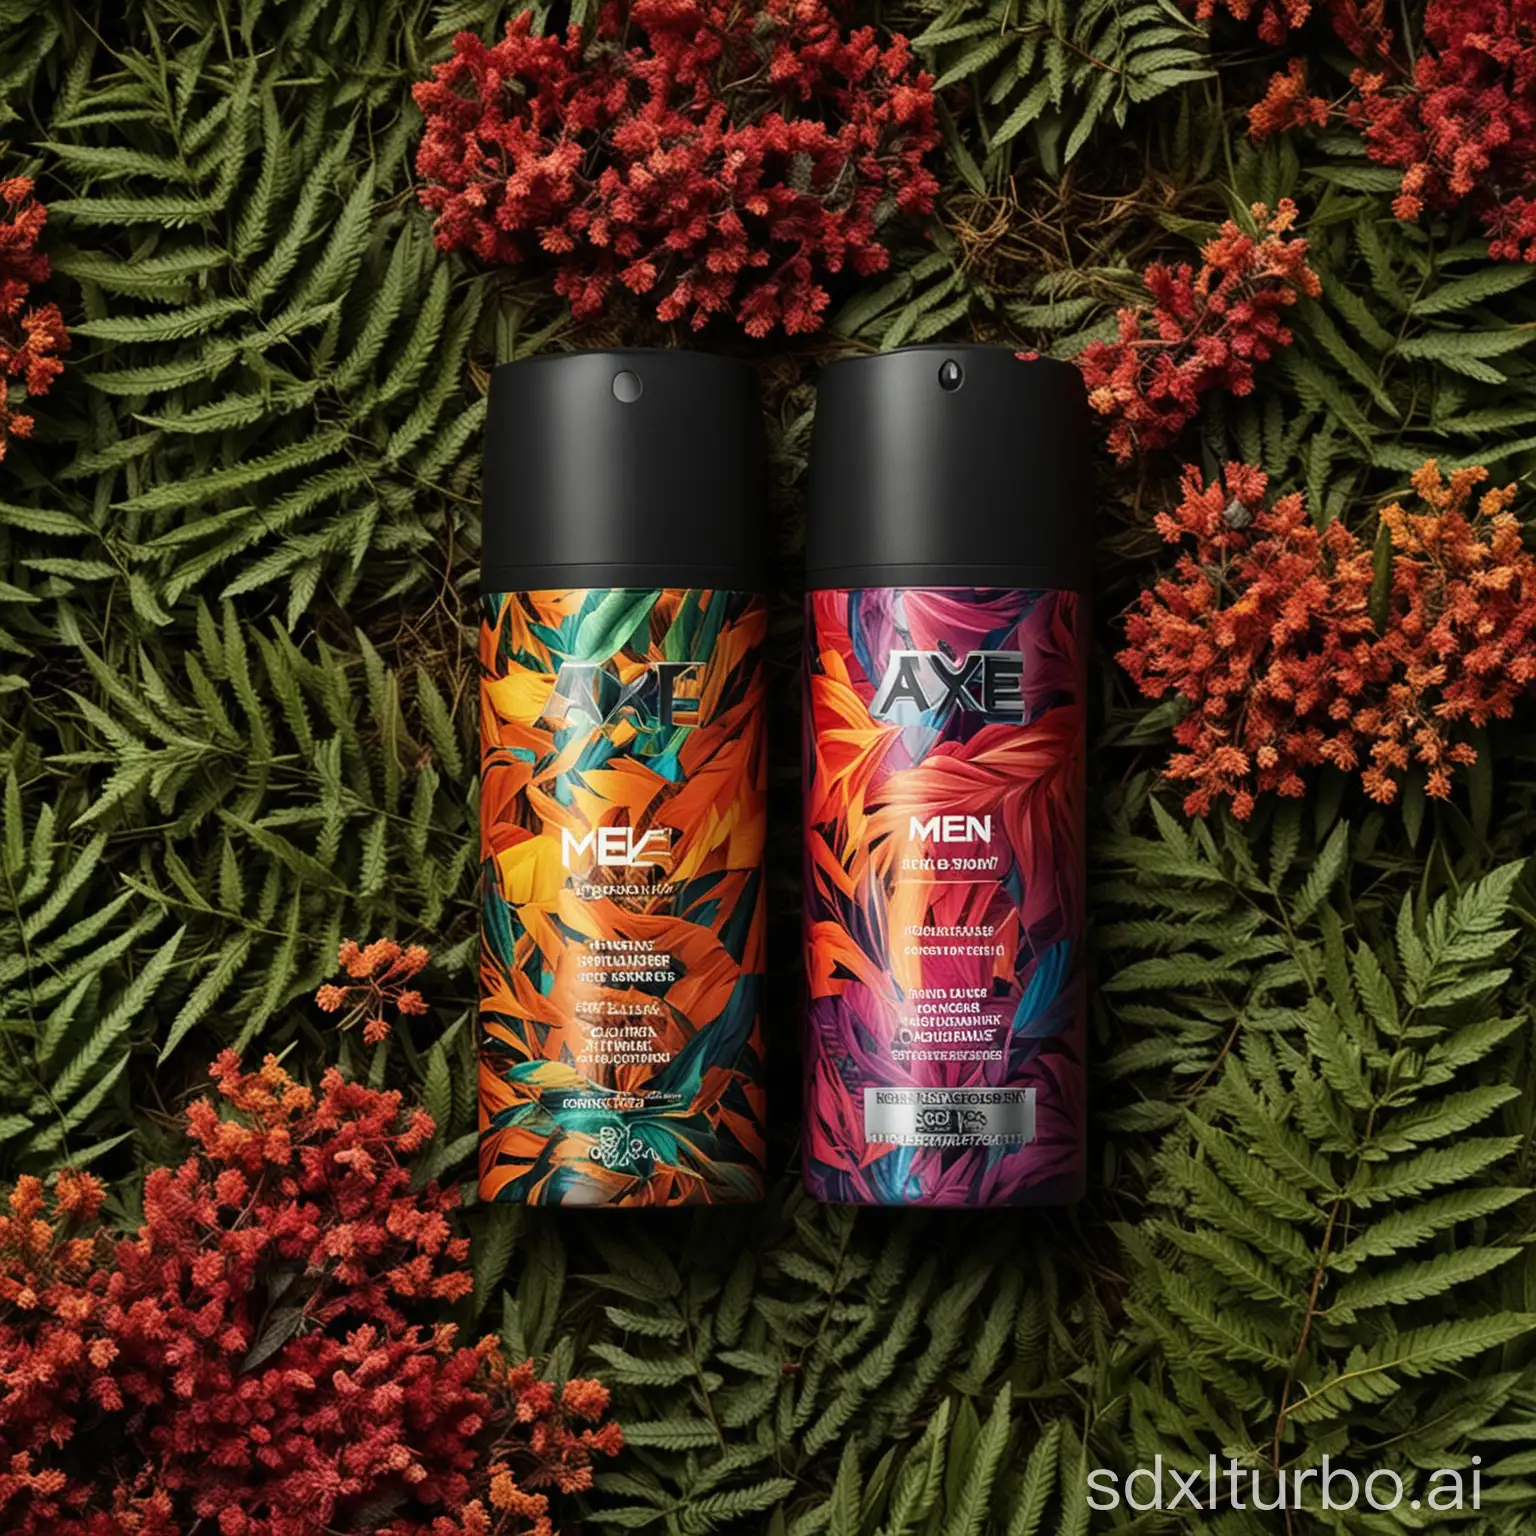 Advertisement for AXE brand men's deodorant spray colorful in nature